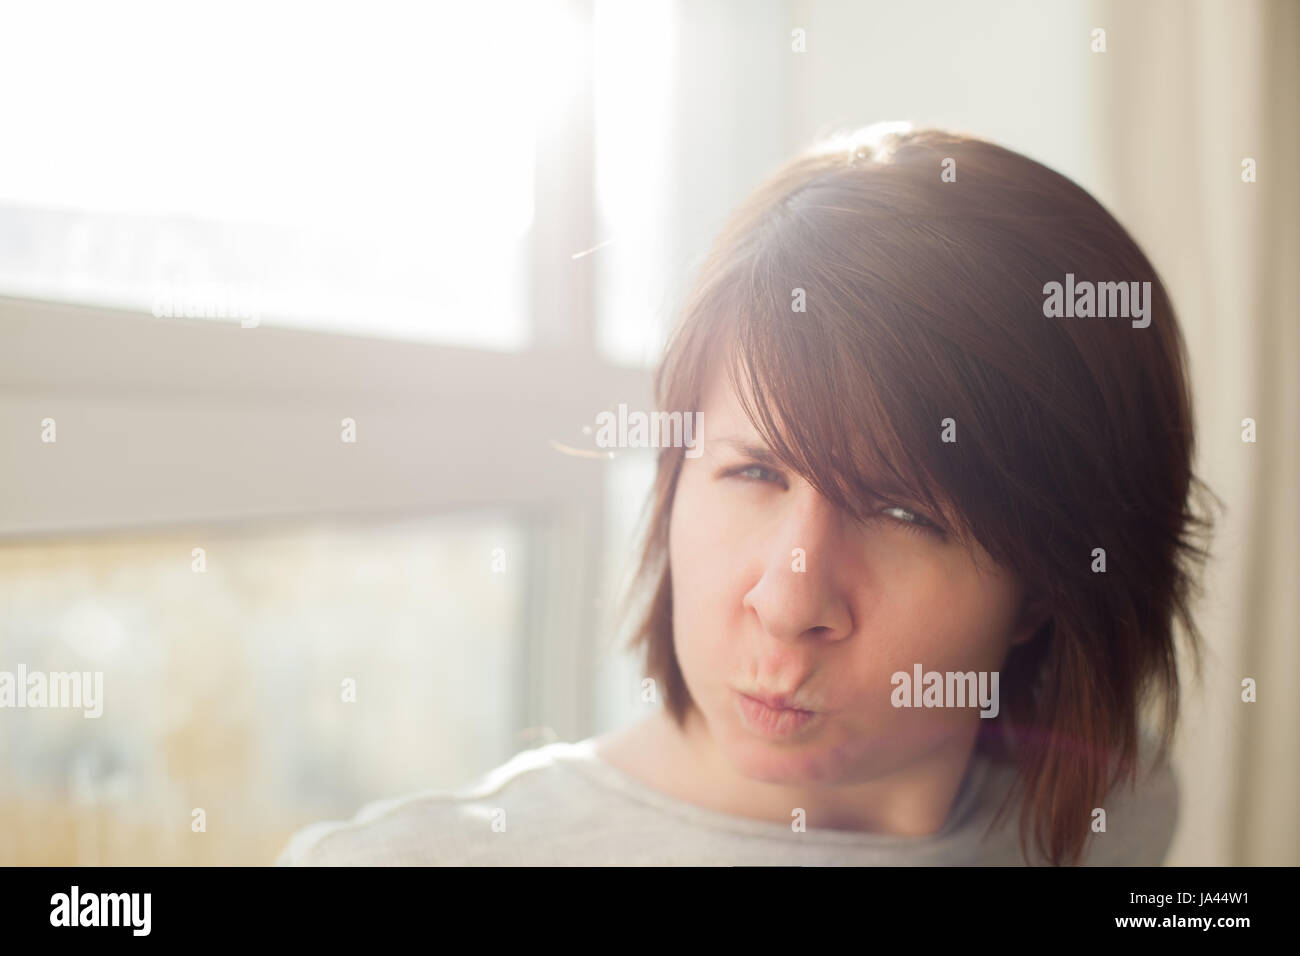 Angry girl frowns face and dissatisfied looks ahead Stock Photo